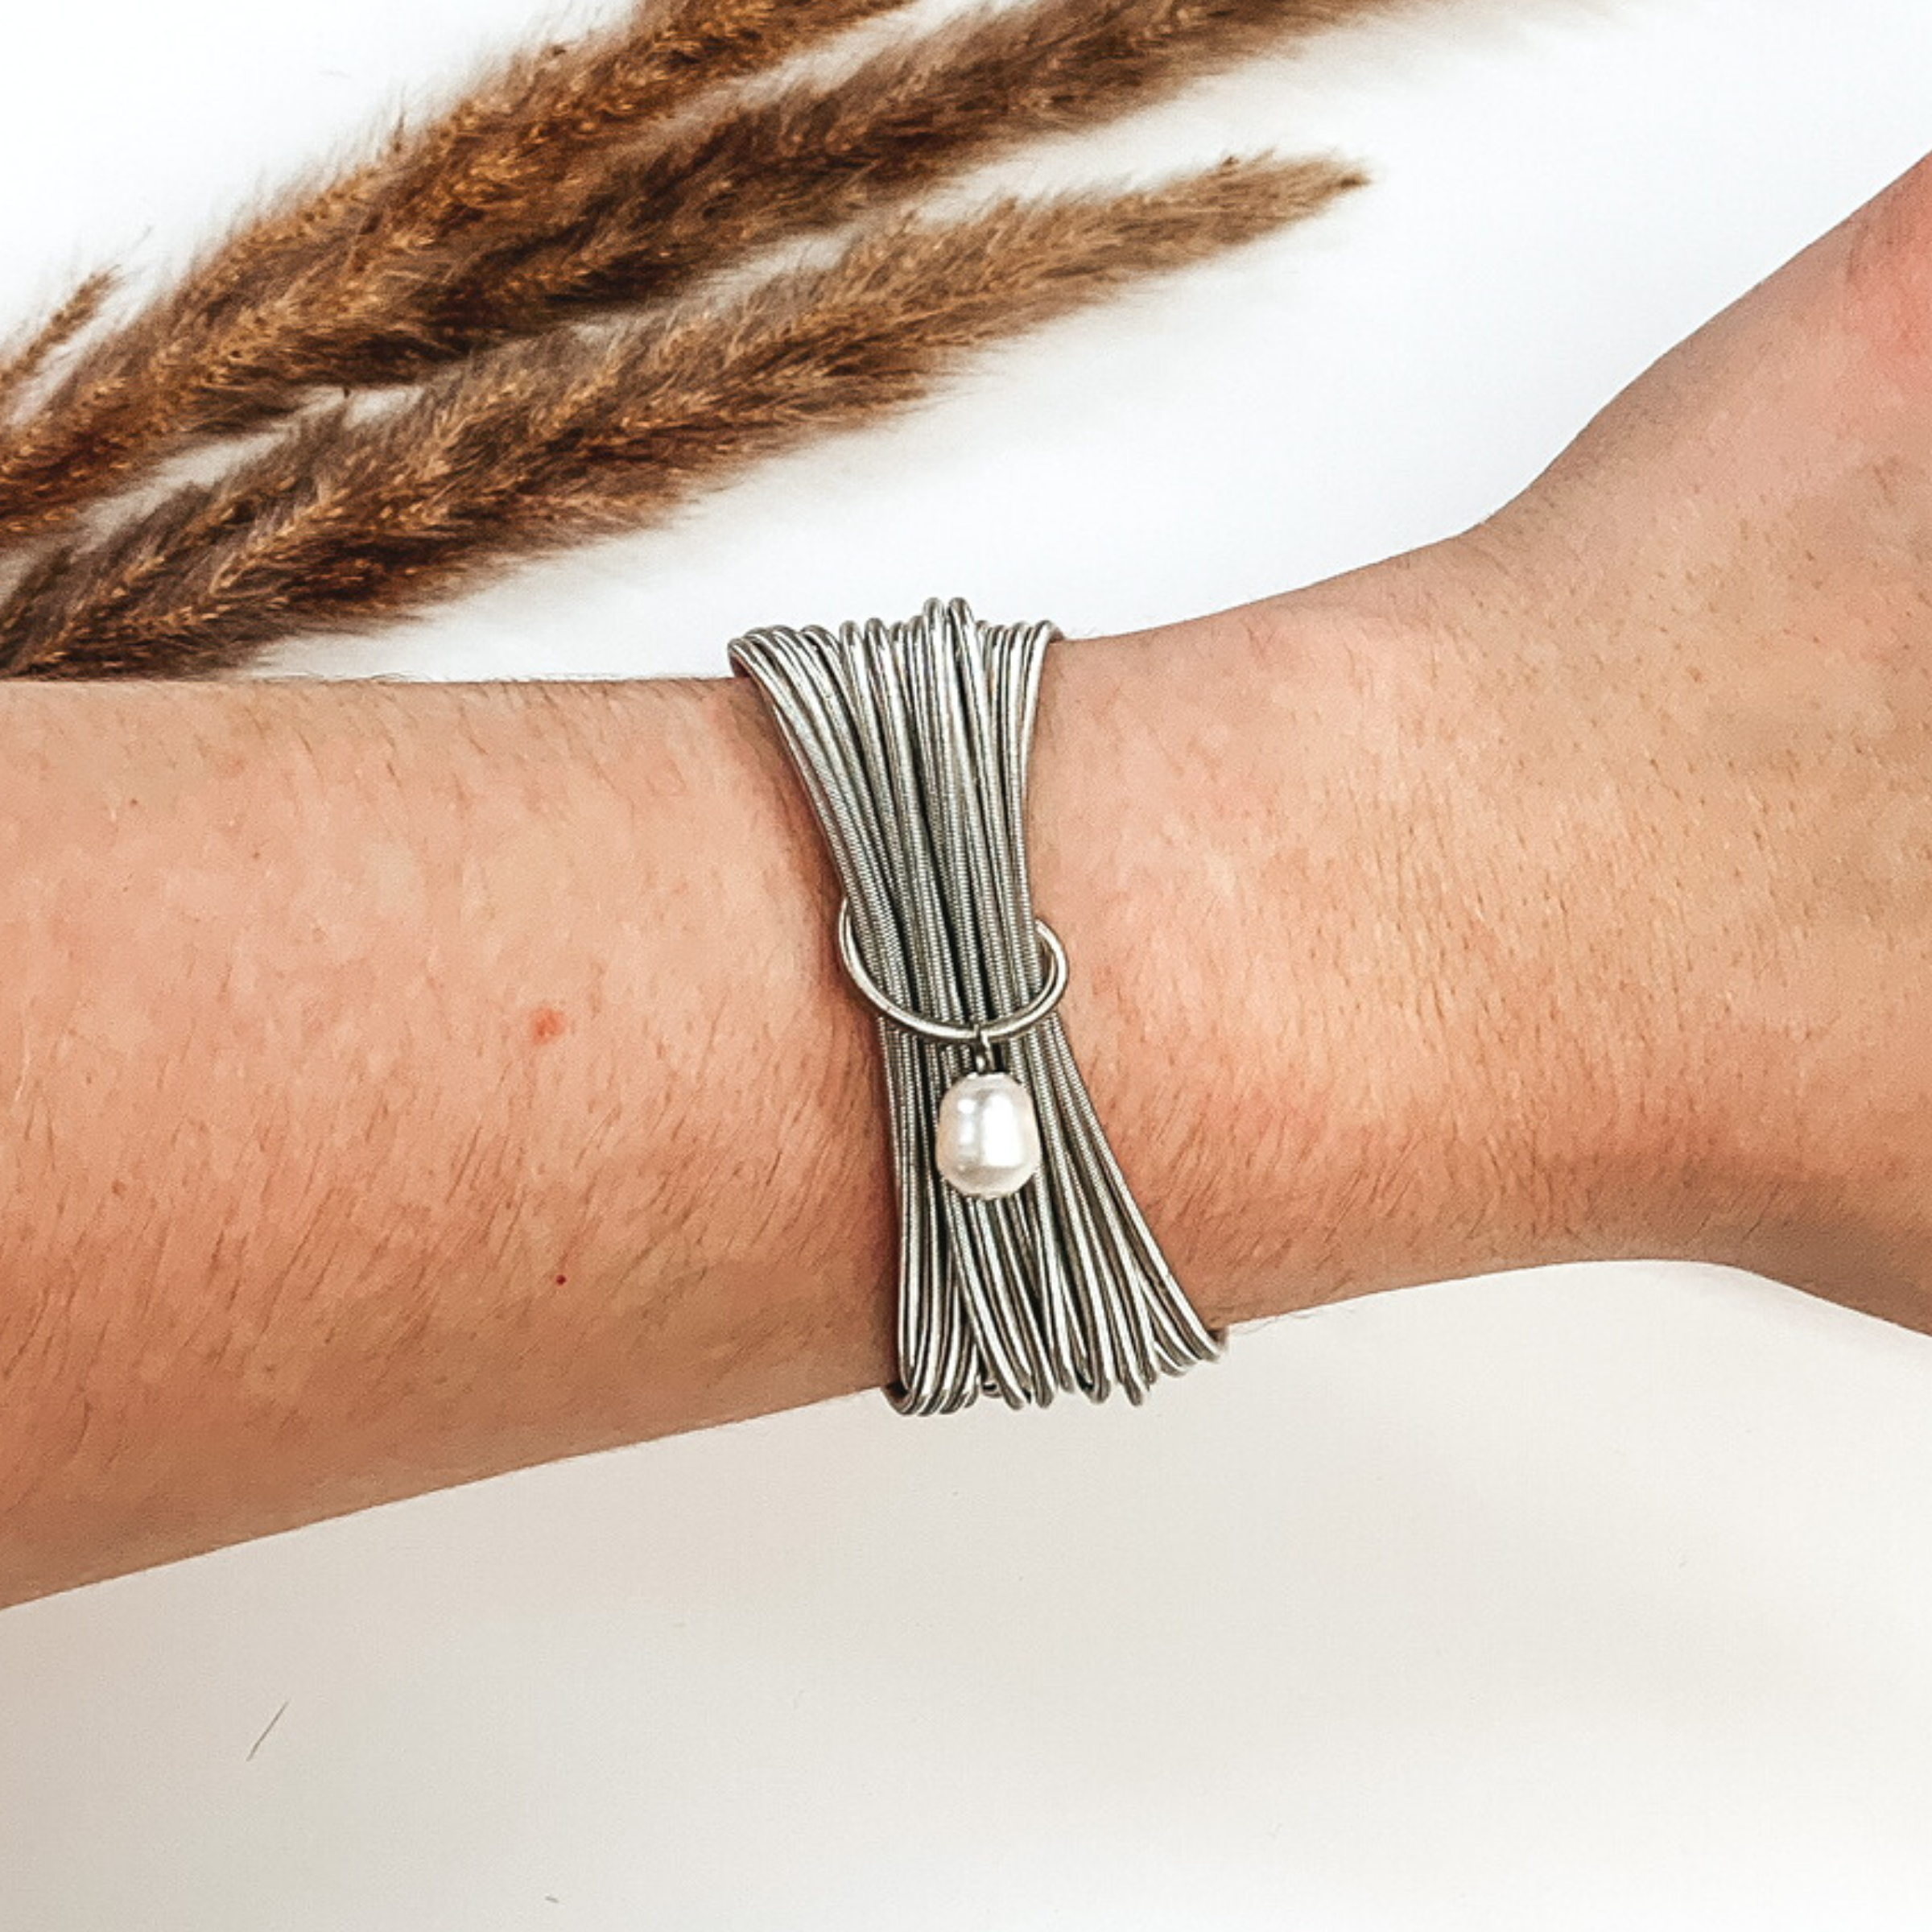 Guitar String Elastic Bracelet Set in Silver with a Pearl Charm - Giddy Up Glamour Boutique